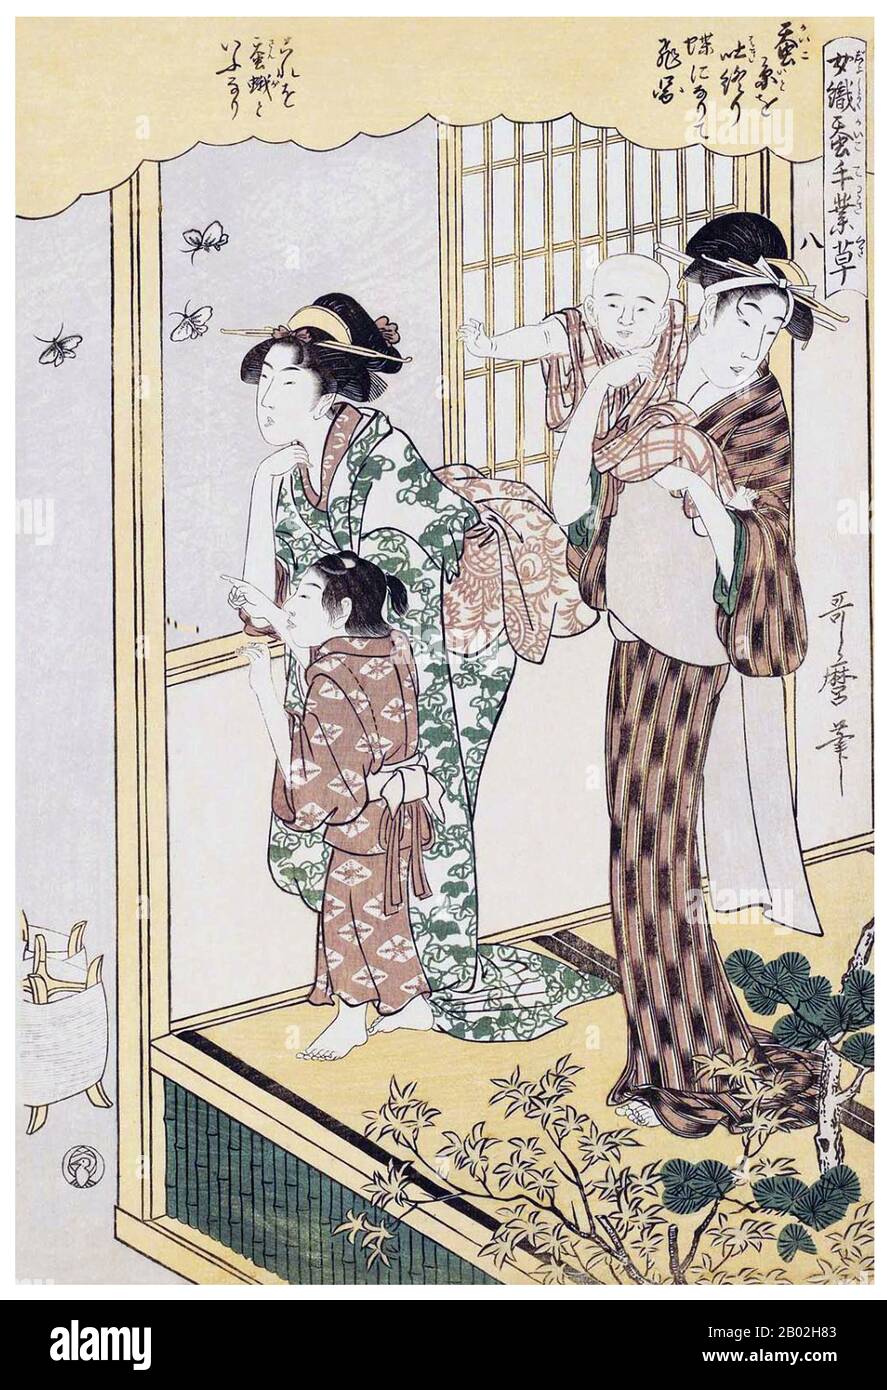 8. 'Watching moths', depicting two women and their children watching flying moths in the evening.  Kitagawa Utamaro (ca. 1753 - October 31, 1806) was a Japanese printmaker and painter, who is considered one of the greatest artists of woodblock prints (ukiyo-e). He is known especially for his masterfully composed studies of women, known as bijinga. He also produced nature studies, particularly illustrated books of insects. Stock Photo